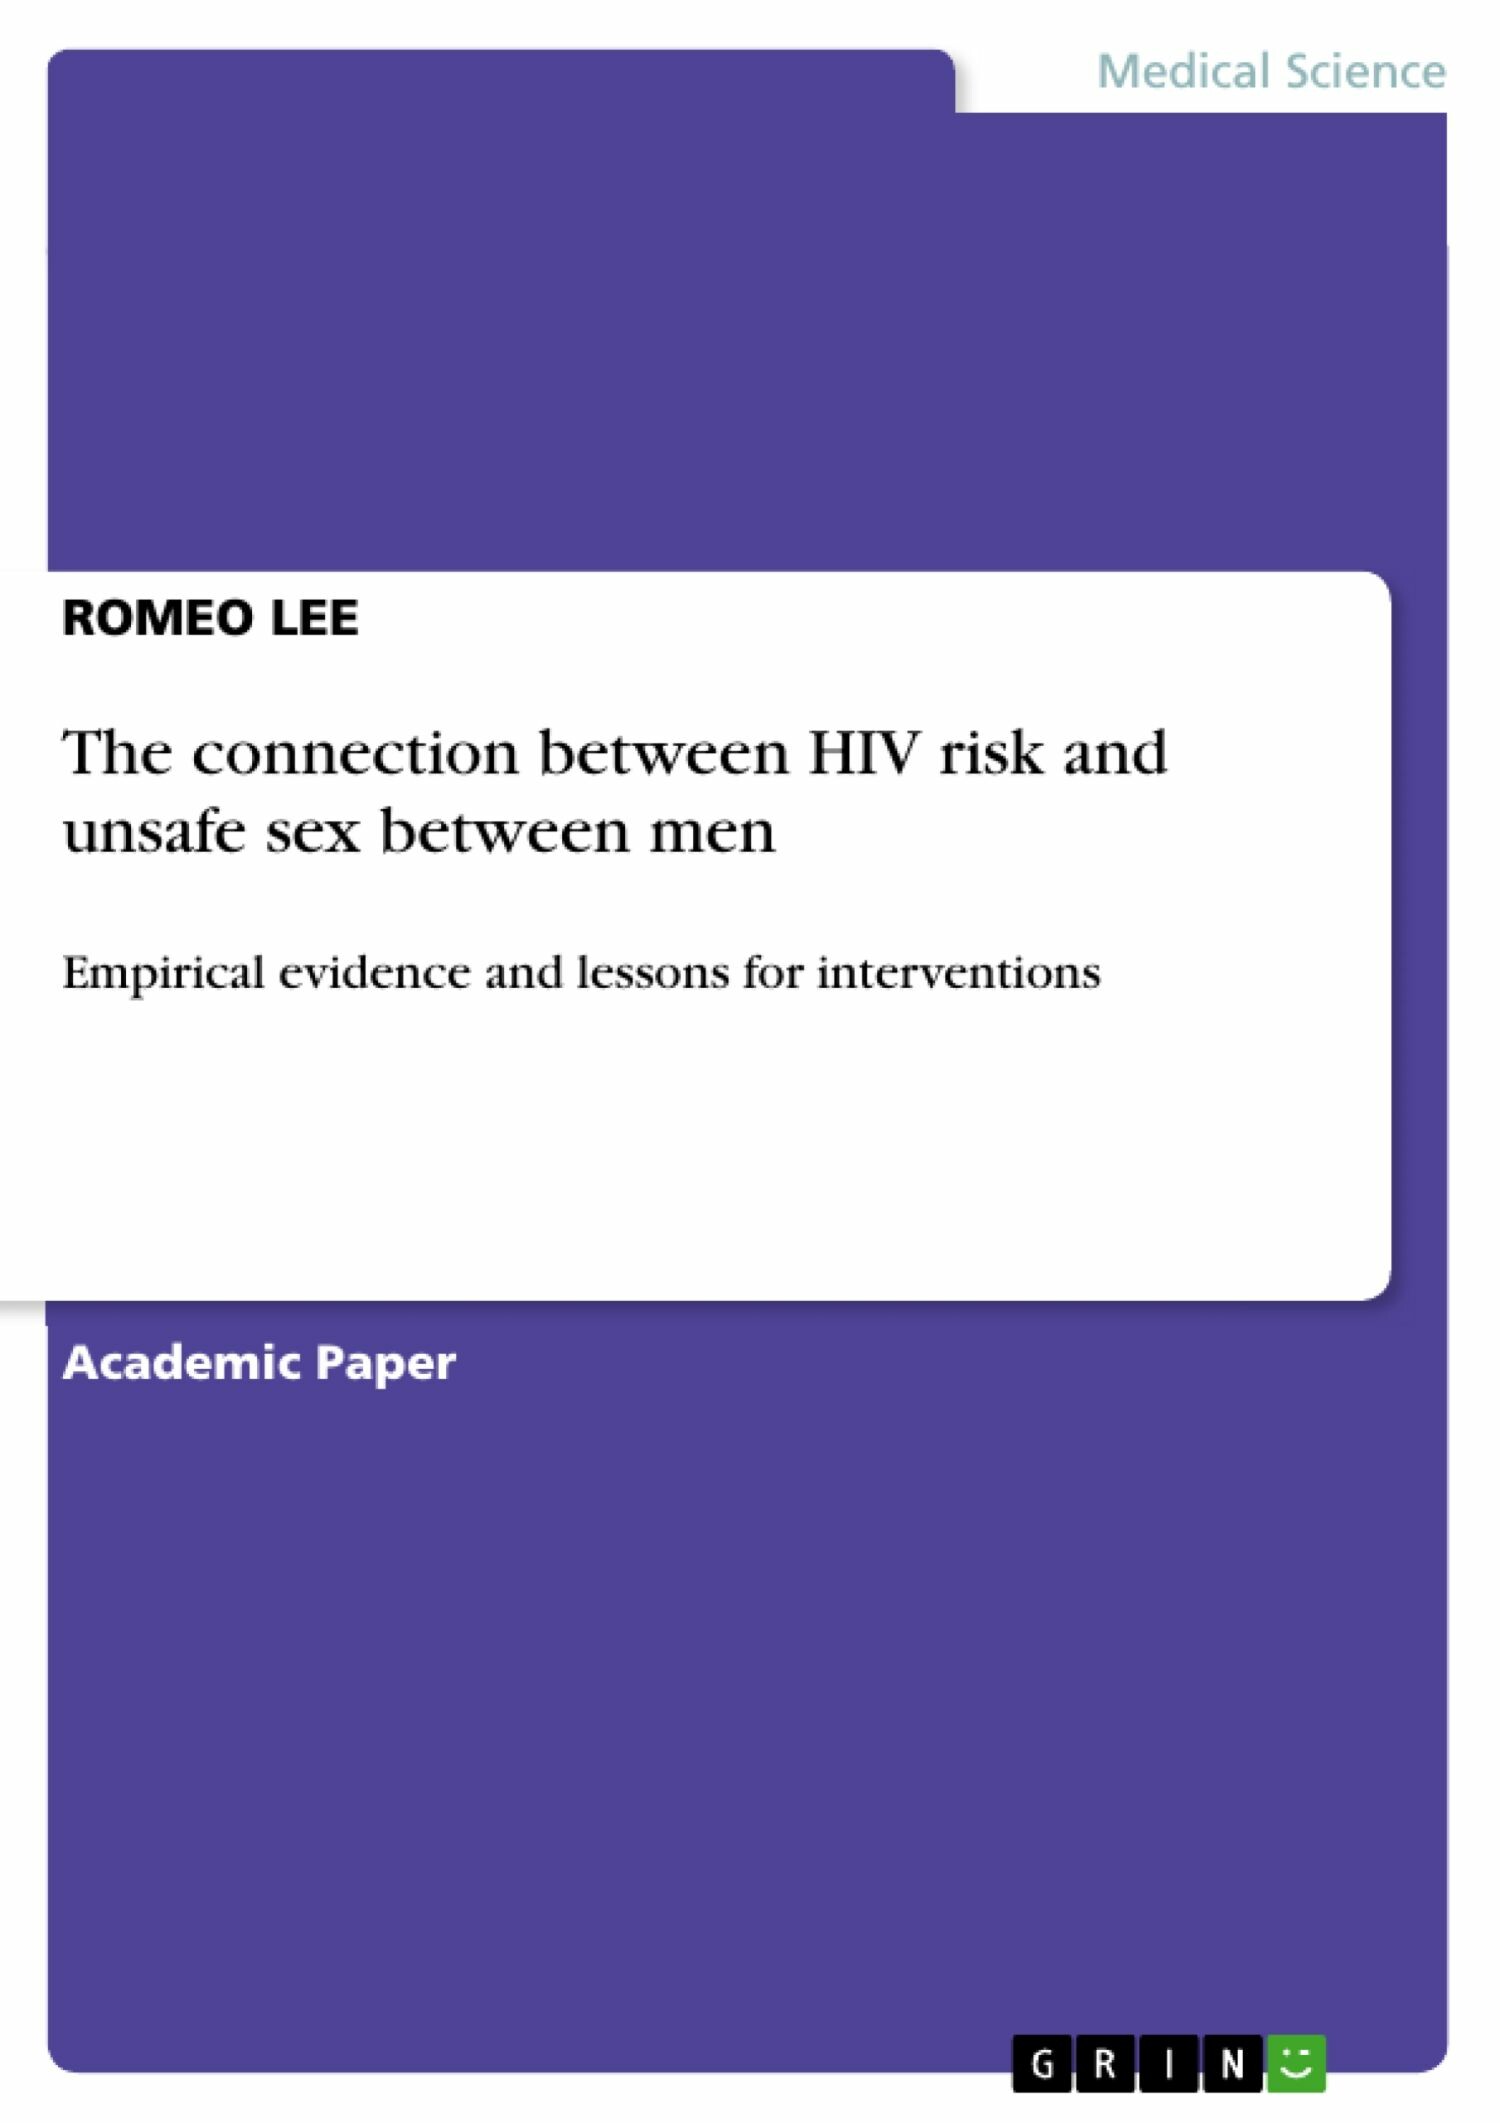 The connection between HIV risk and unsafe sex between men